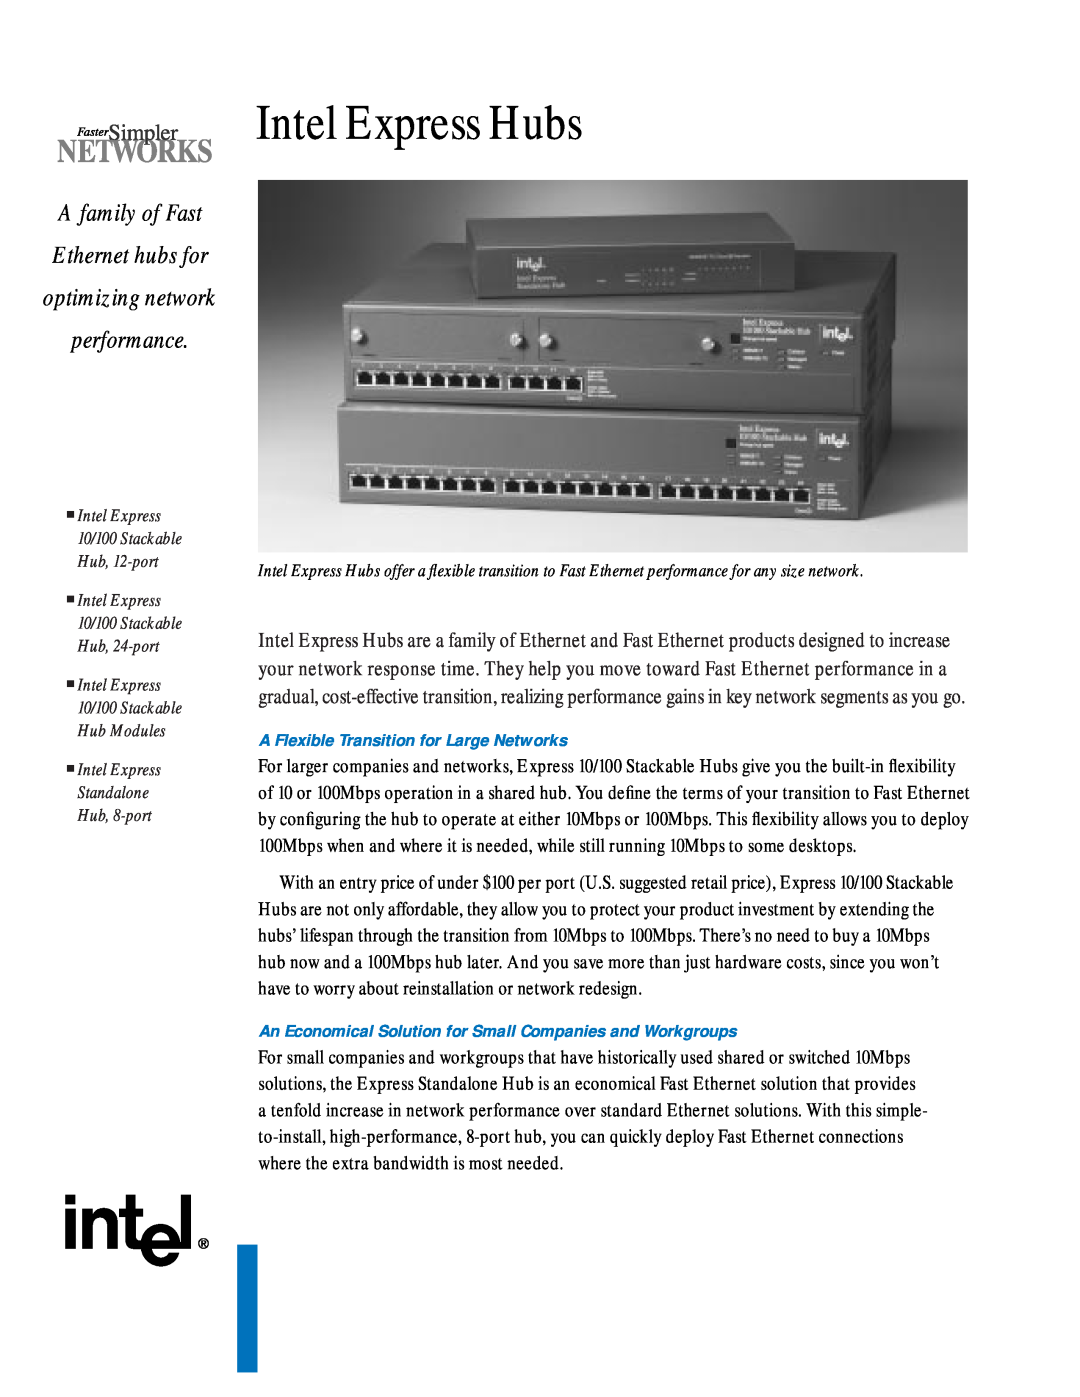 Intel manual A family of Fast Ethernet hubs for optimizing network performance, Intel Express Hubs 